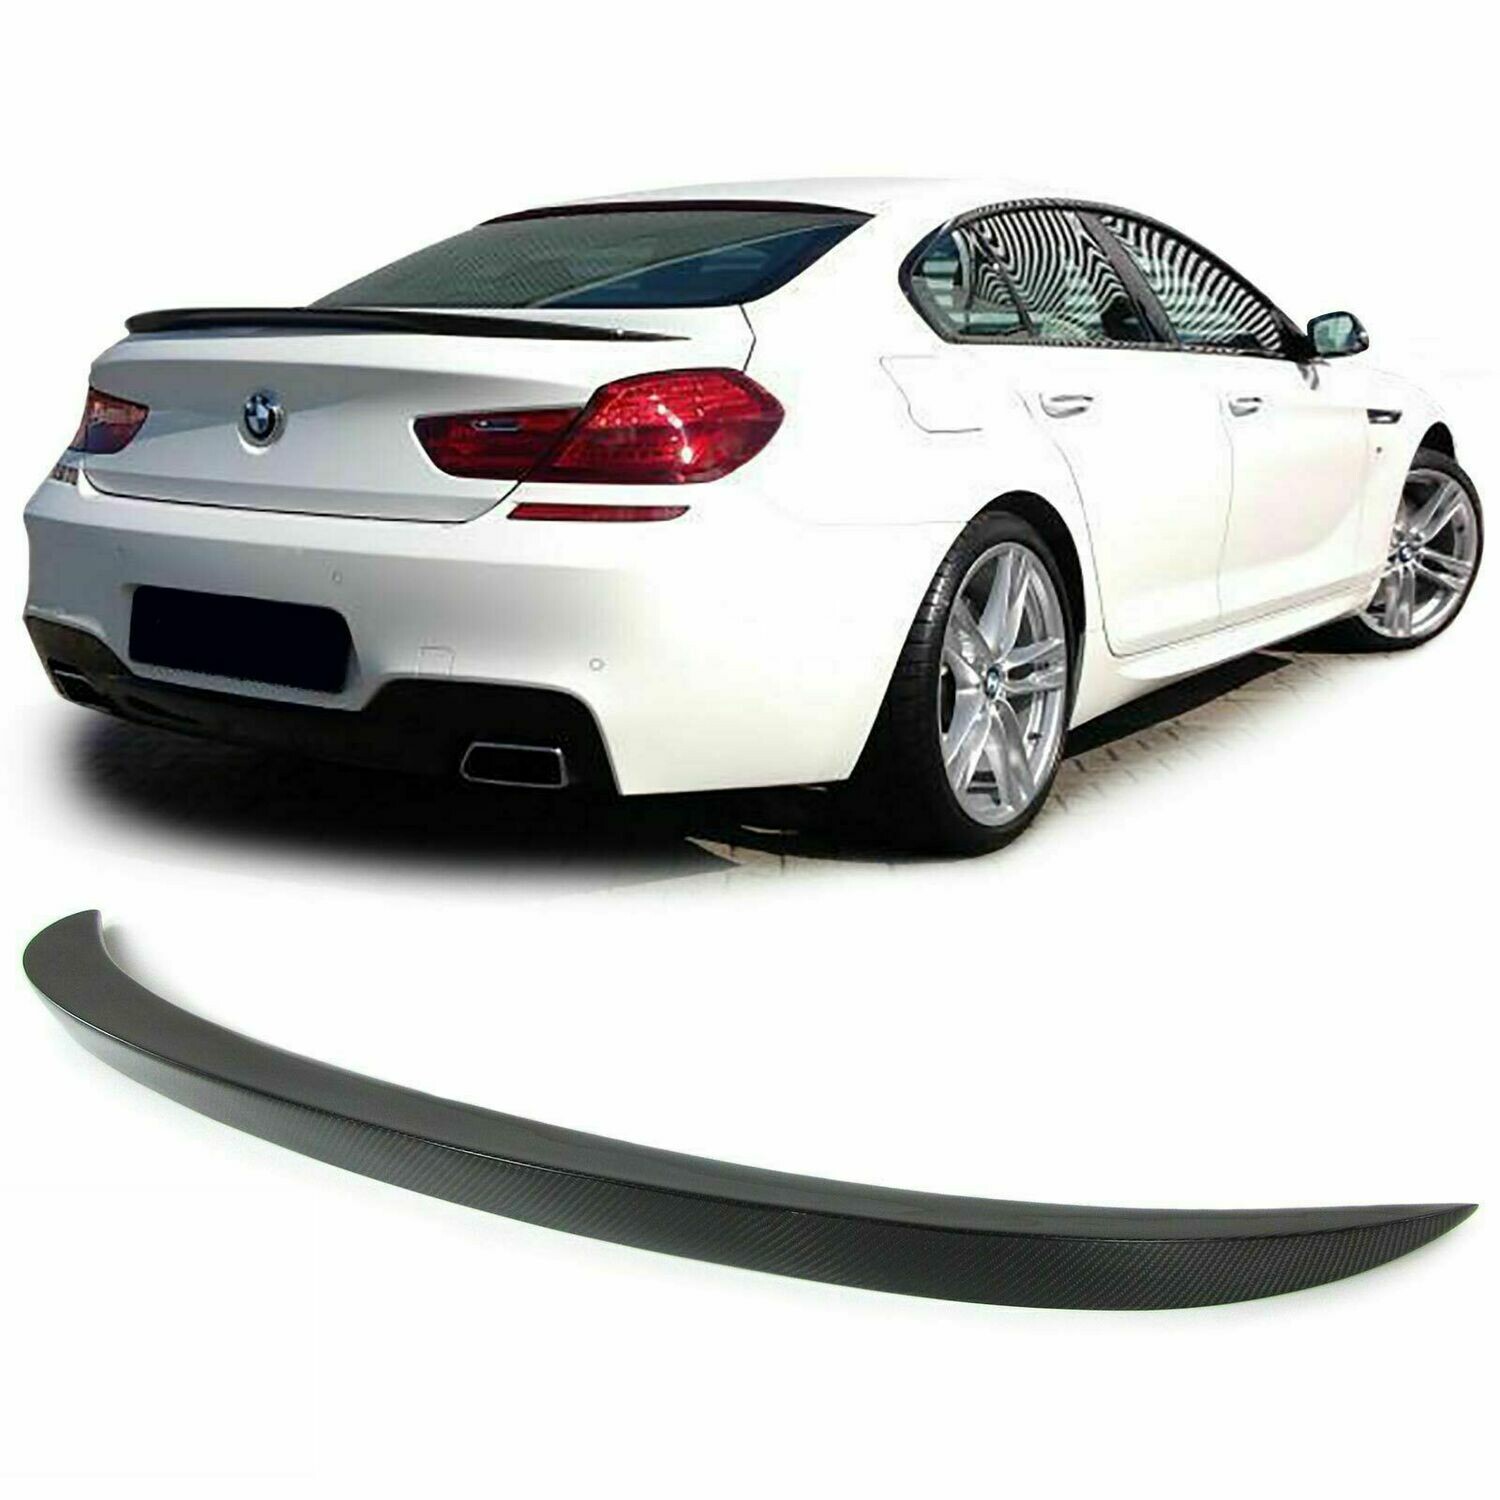 Rear boot Carbon spoiler for BMW F12 F13 F06 2010 Series 6 Sport Look